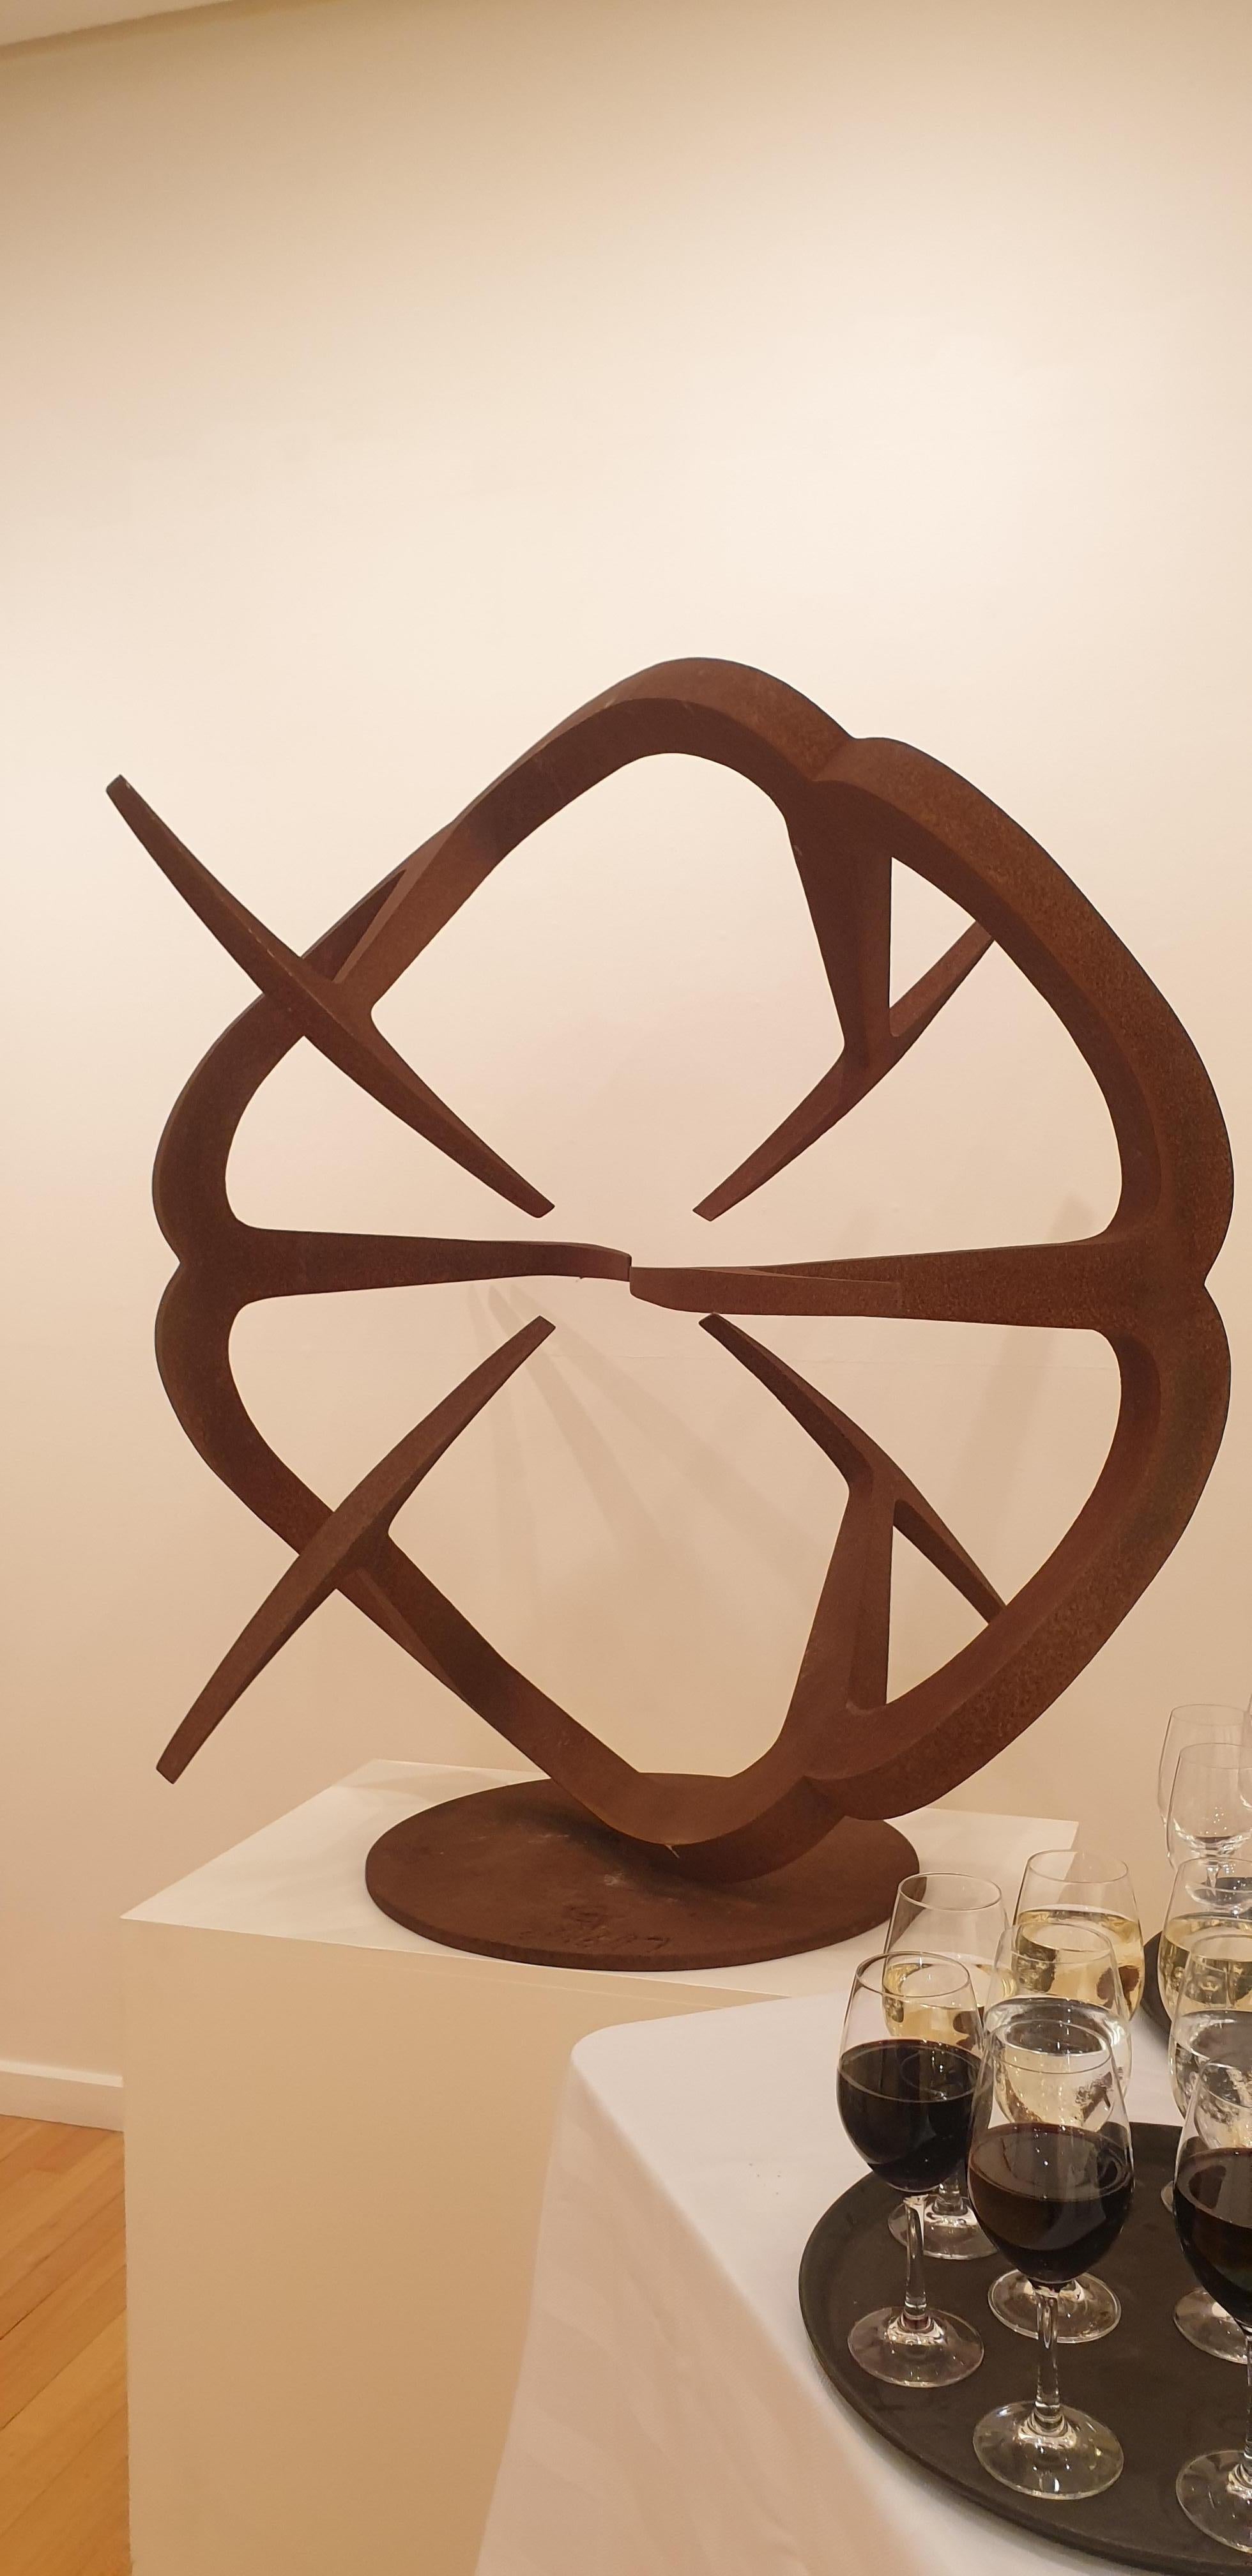 Towards the Centre, Solid Mild Steel, Edition of 9 - Abstract Sculpture by Greg Johns